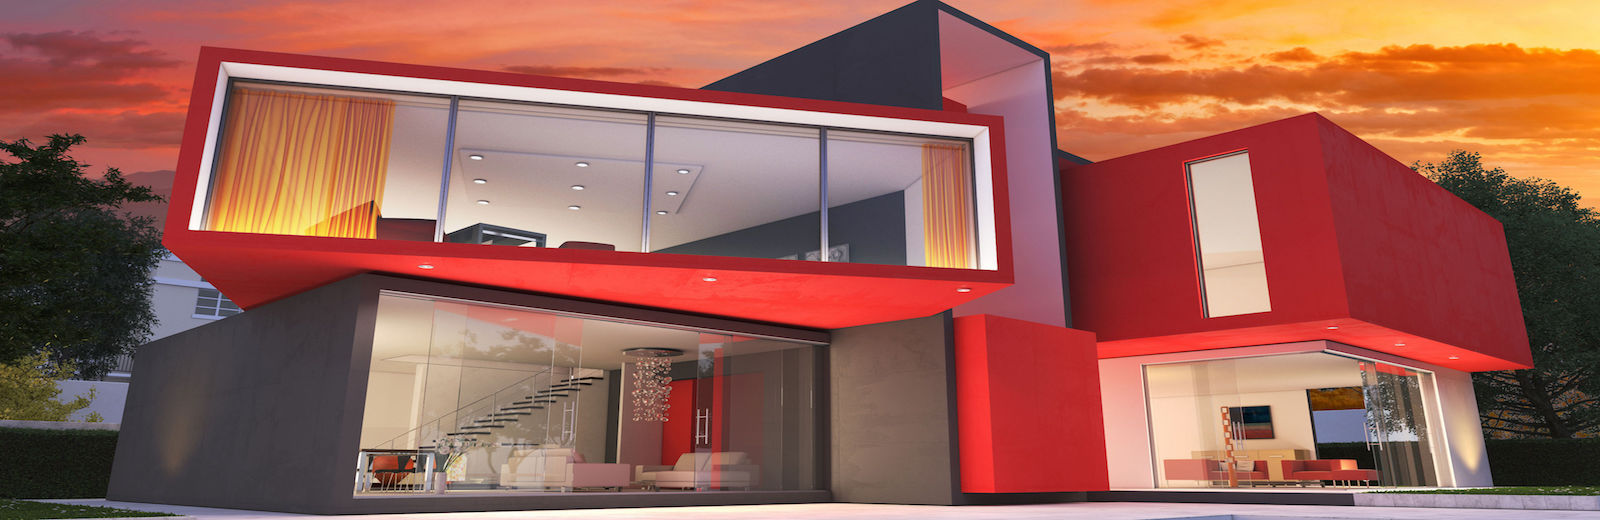 65377478 - realistic 3d rendering of a very modern upscale red house